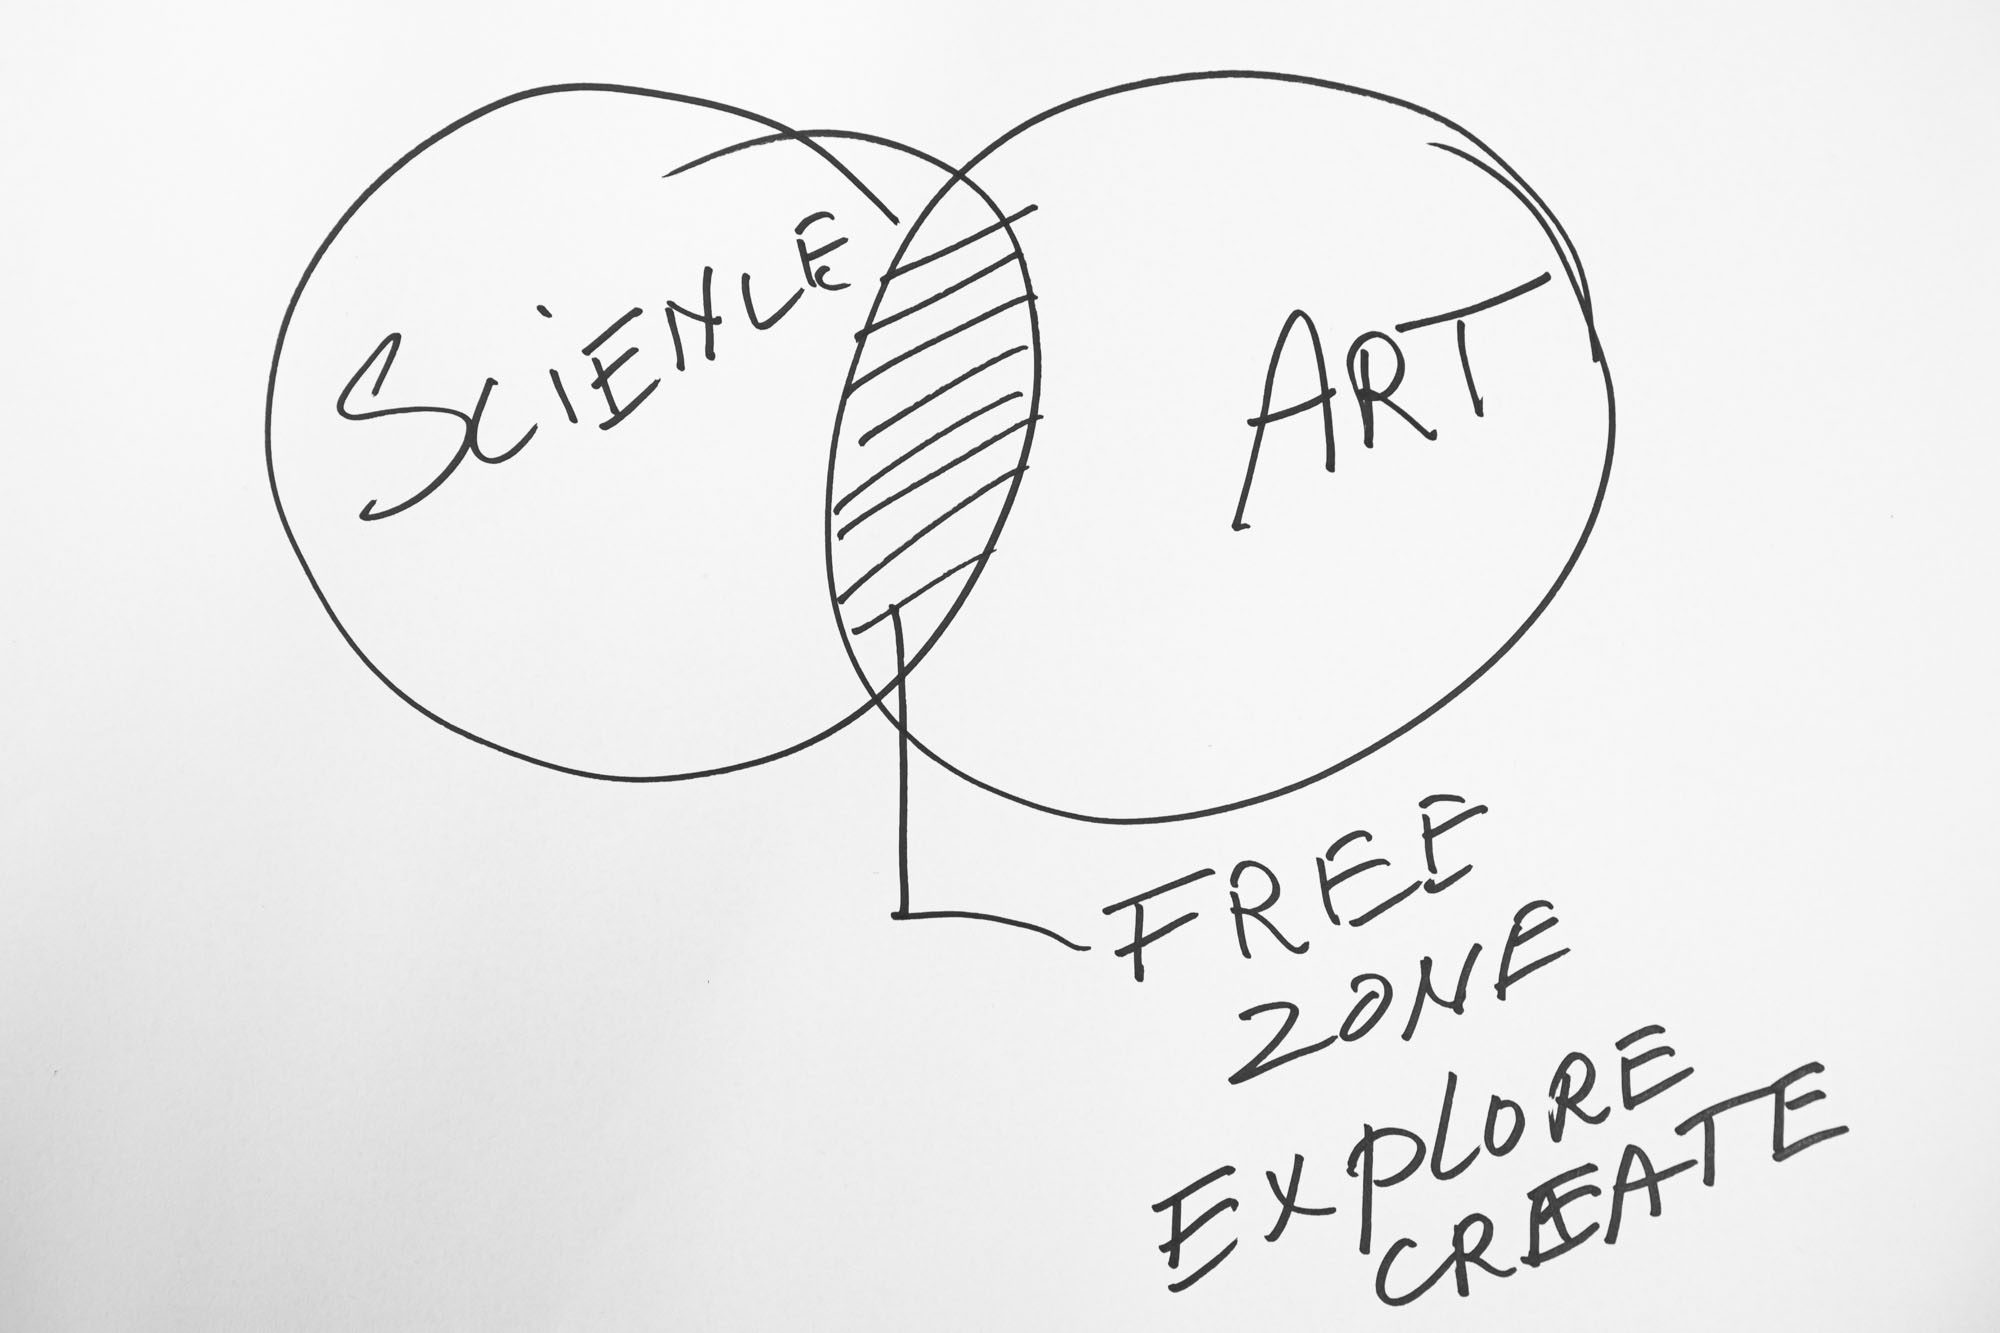 Overlapping cercles of "science" and "art", between them a "free zone explore create"